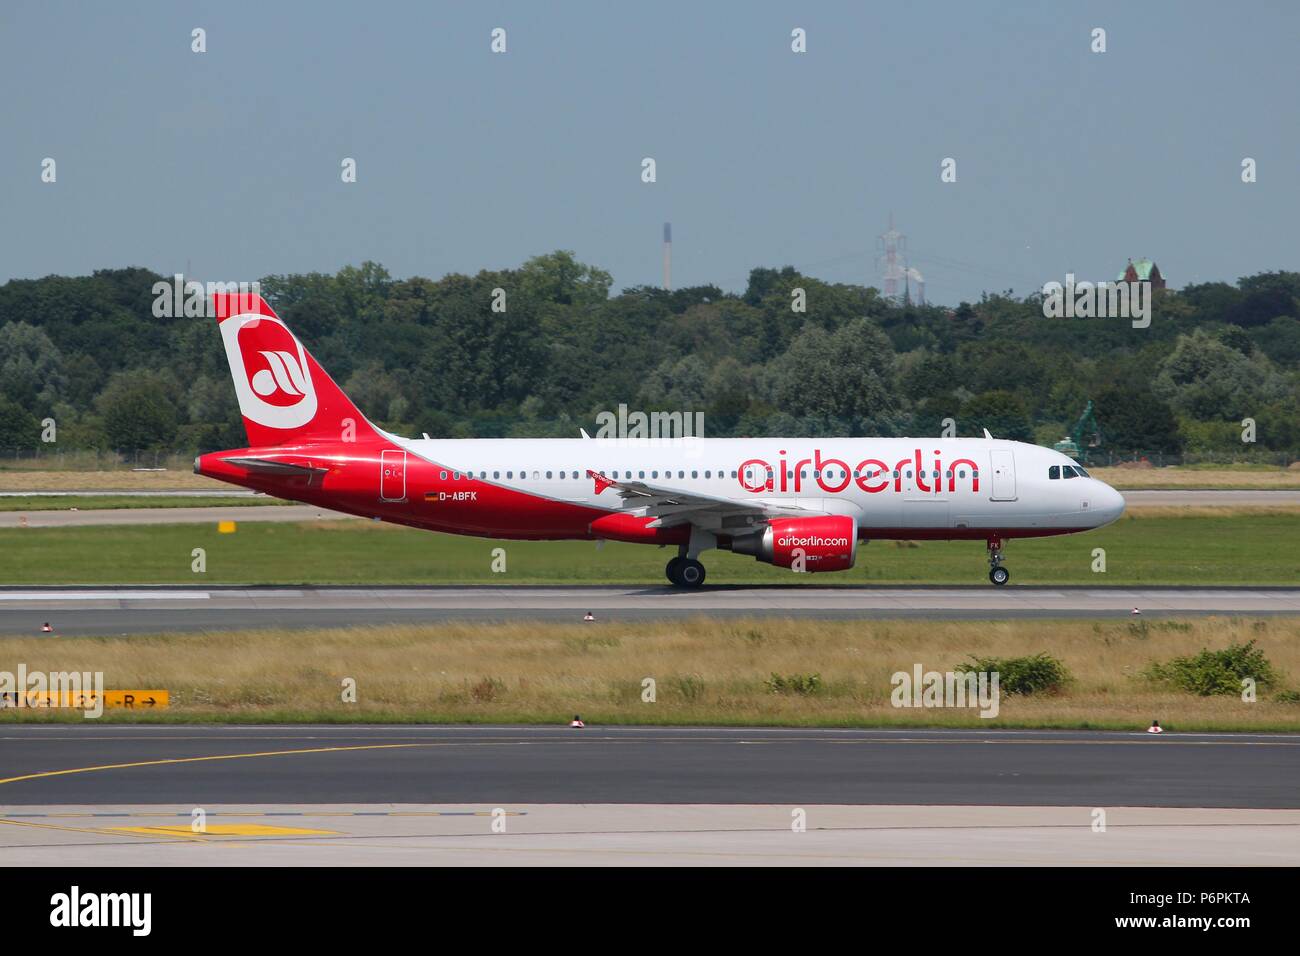 DUSSELDORF, GERMANY - JULY 8: Air Berlin aircraft lands on July 8, 2013 in Dusseldorf Airport, Germany. Air Berlin Group carried more than 33.3 millio Stock Photo